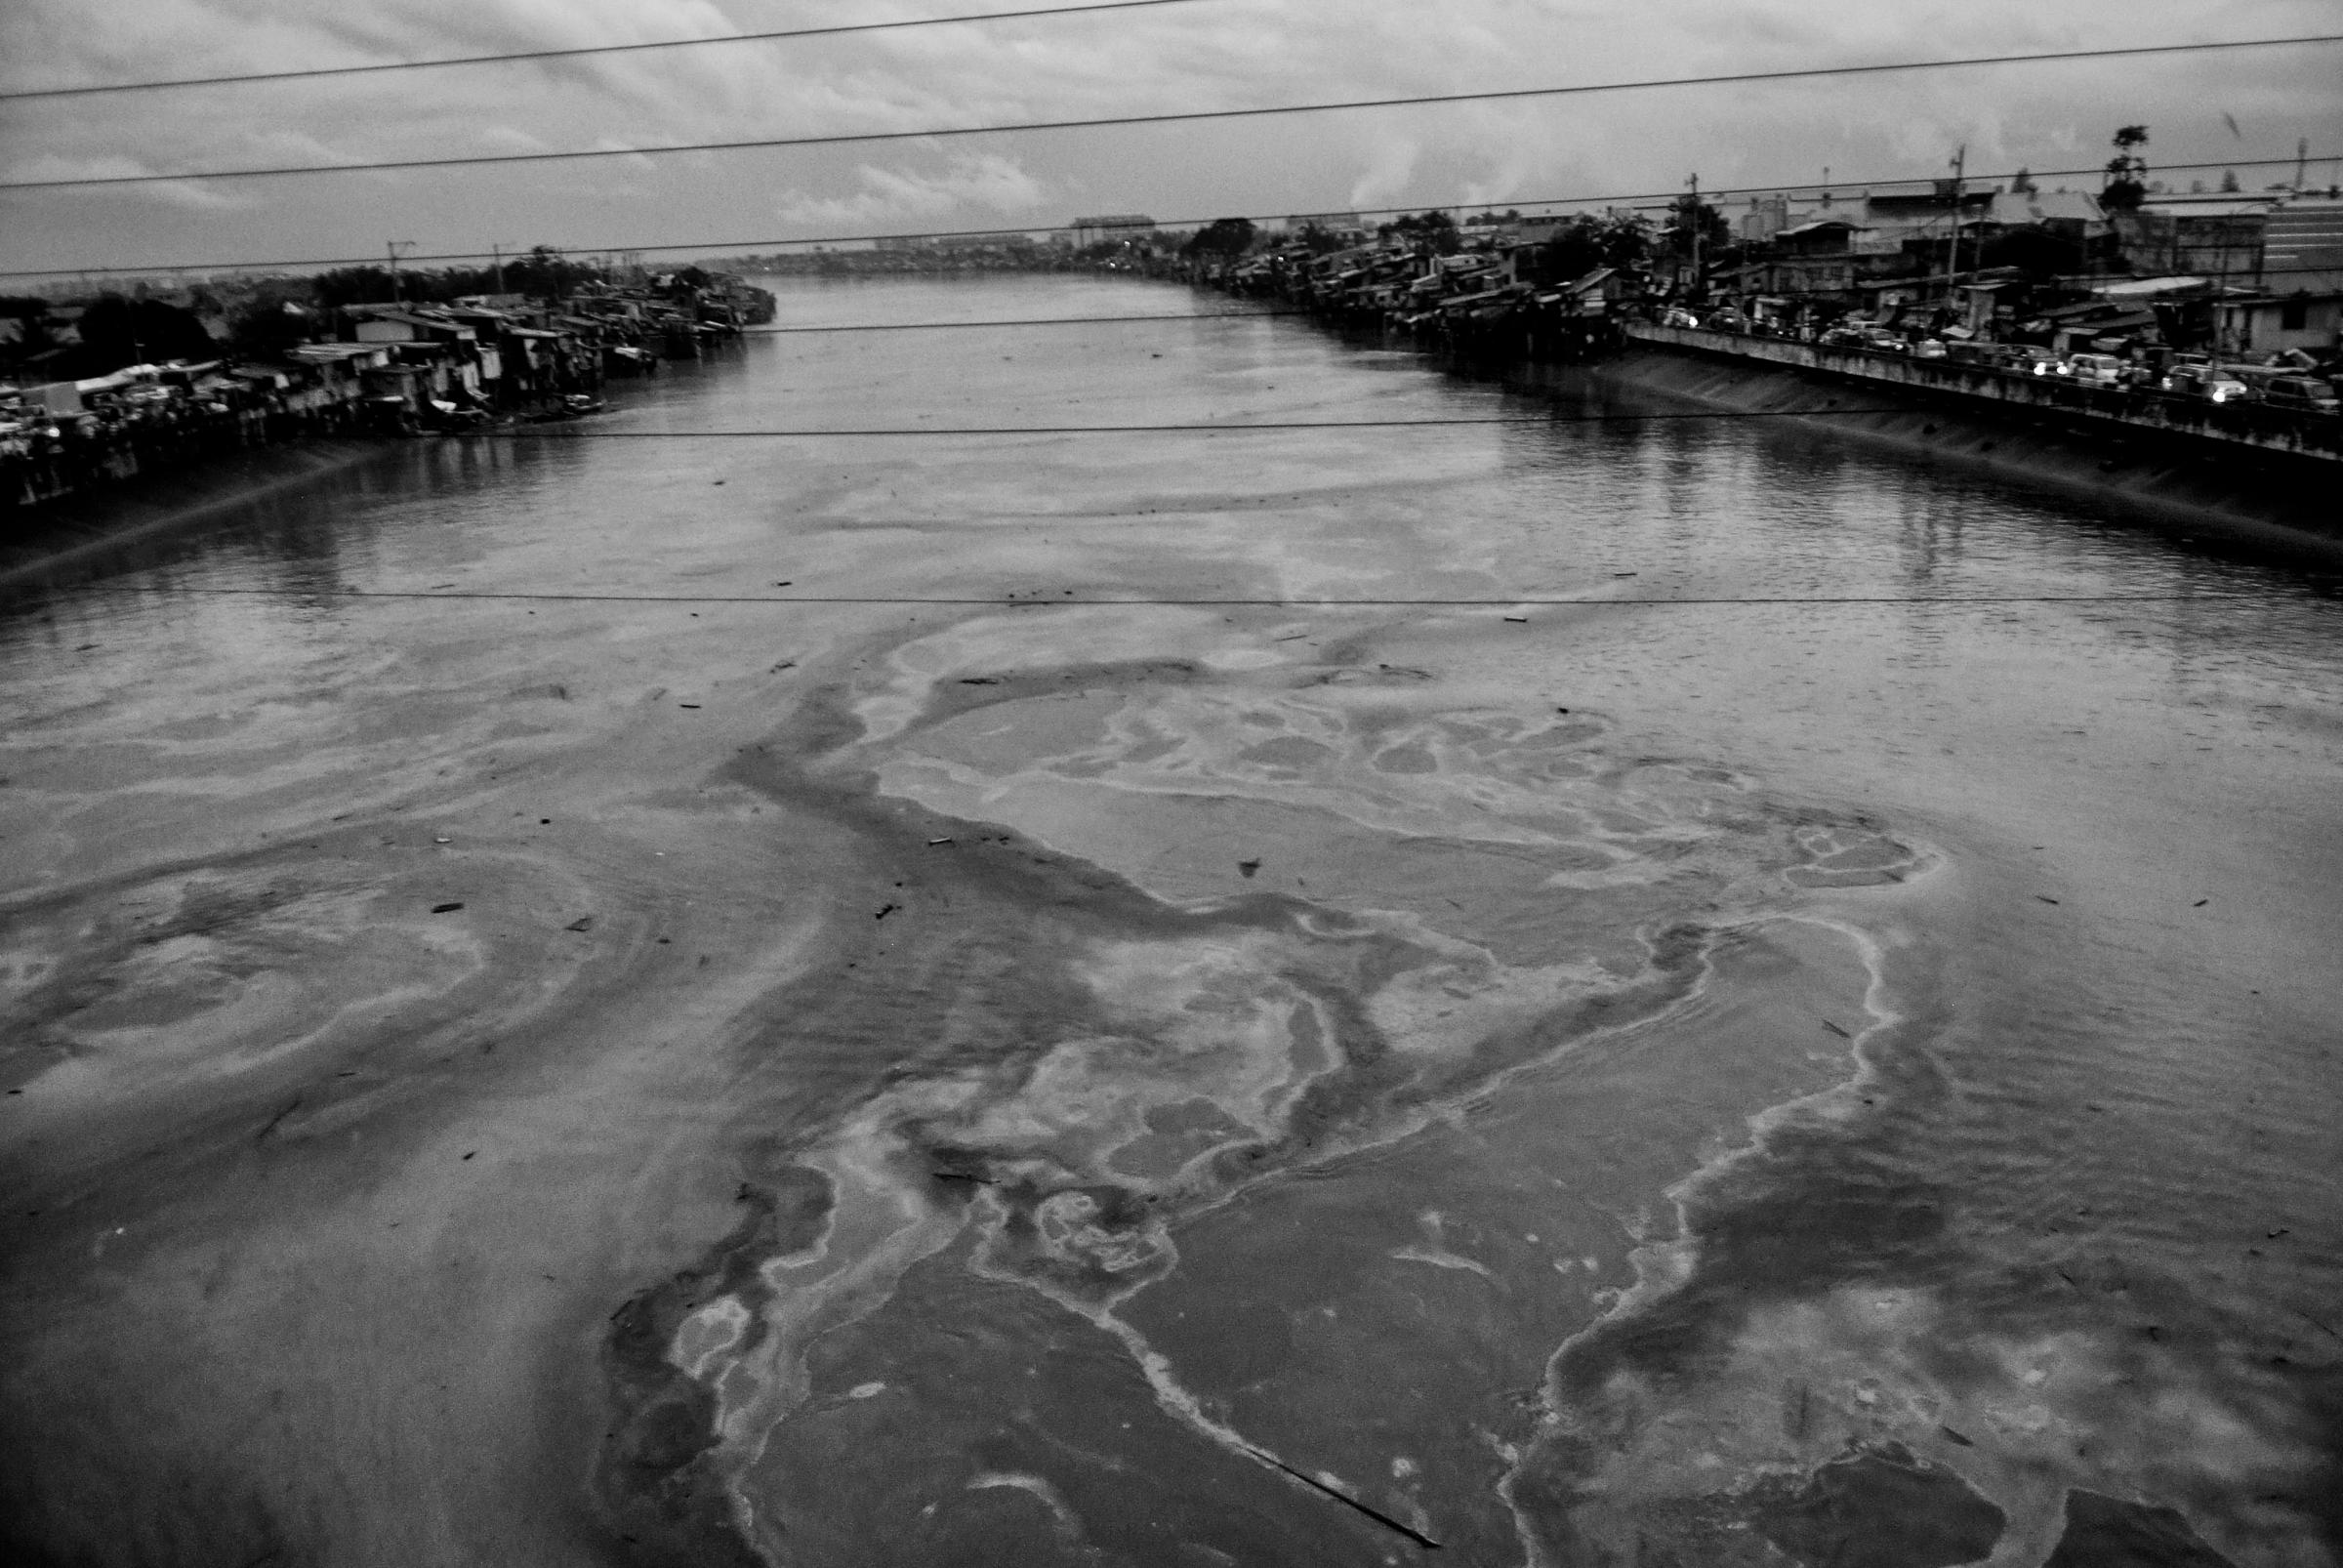 Pollution is visible on the Pasig River following Typhoon Ketsana on Sept. 28, 2009.